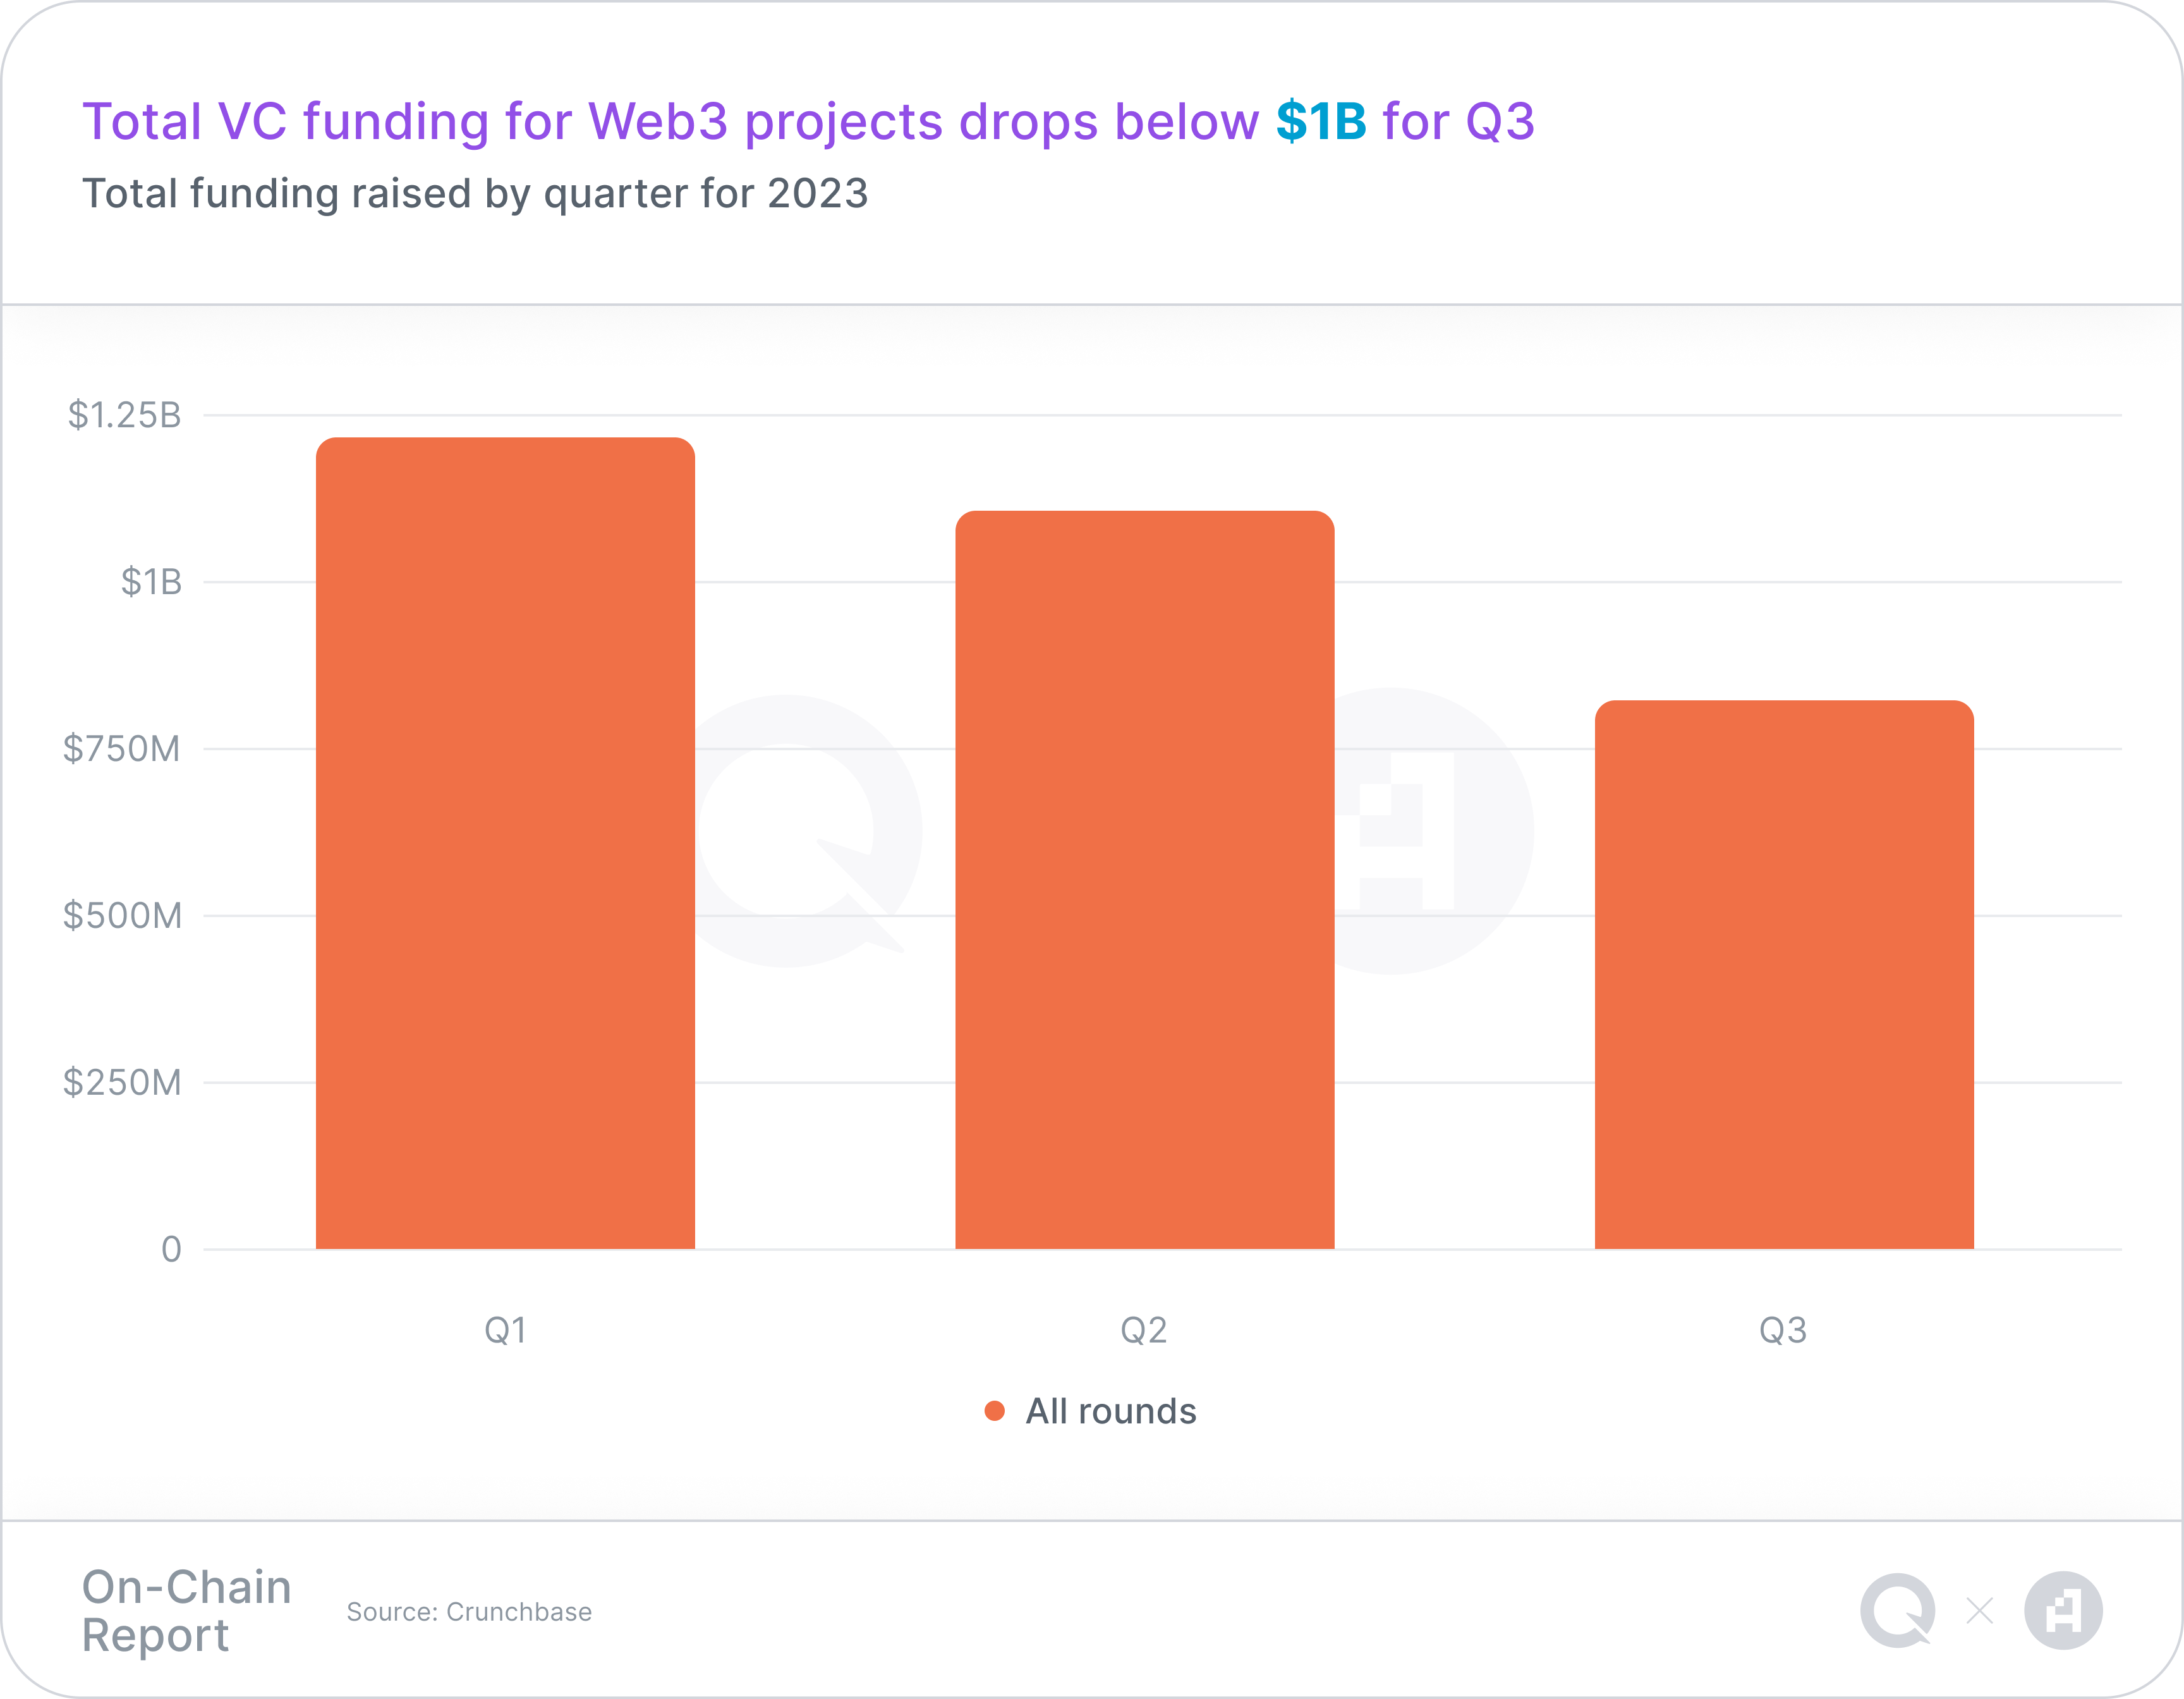 A chart representing Total funding raised by quarter for 2023, with a takeaway headline of "Total VC funding for Web3 projects drops below $1B for Q3"